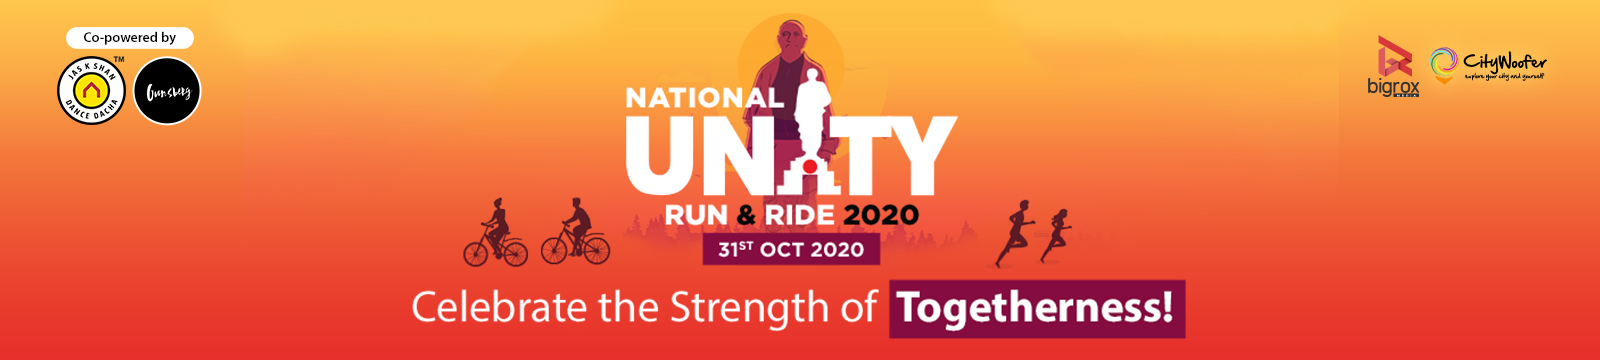 National Unity Run/Ride 2020: Celebrate the Strength of Togetherness!